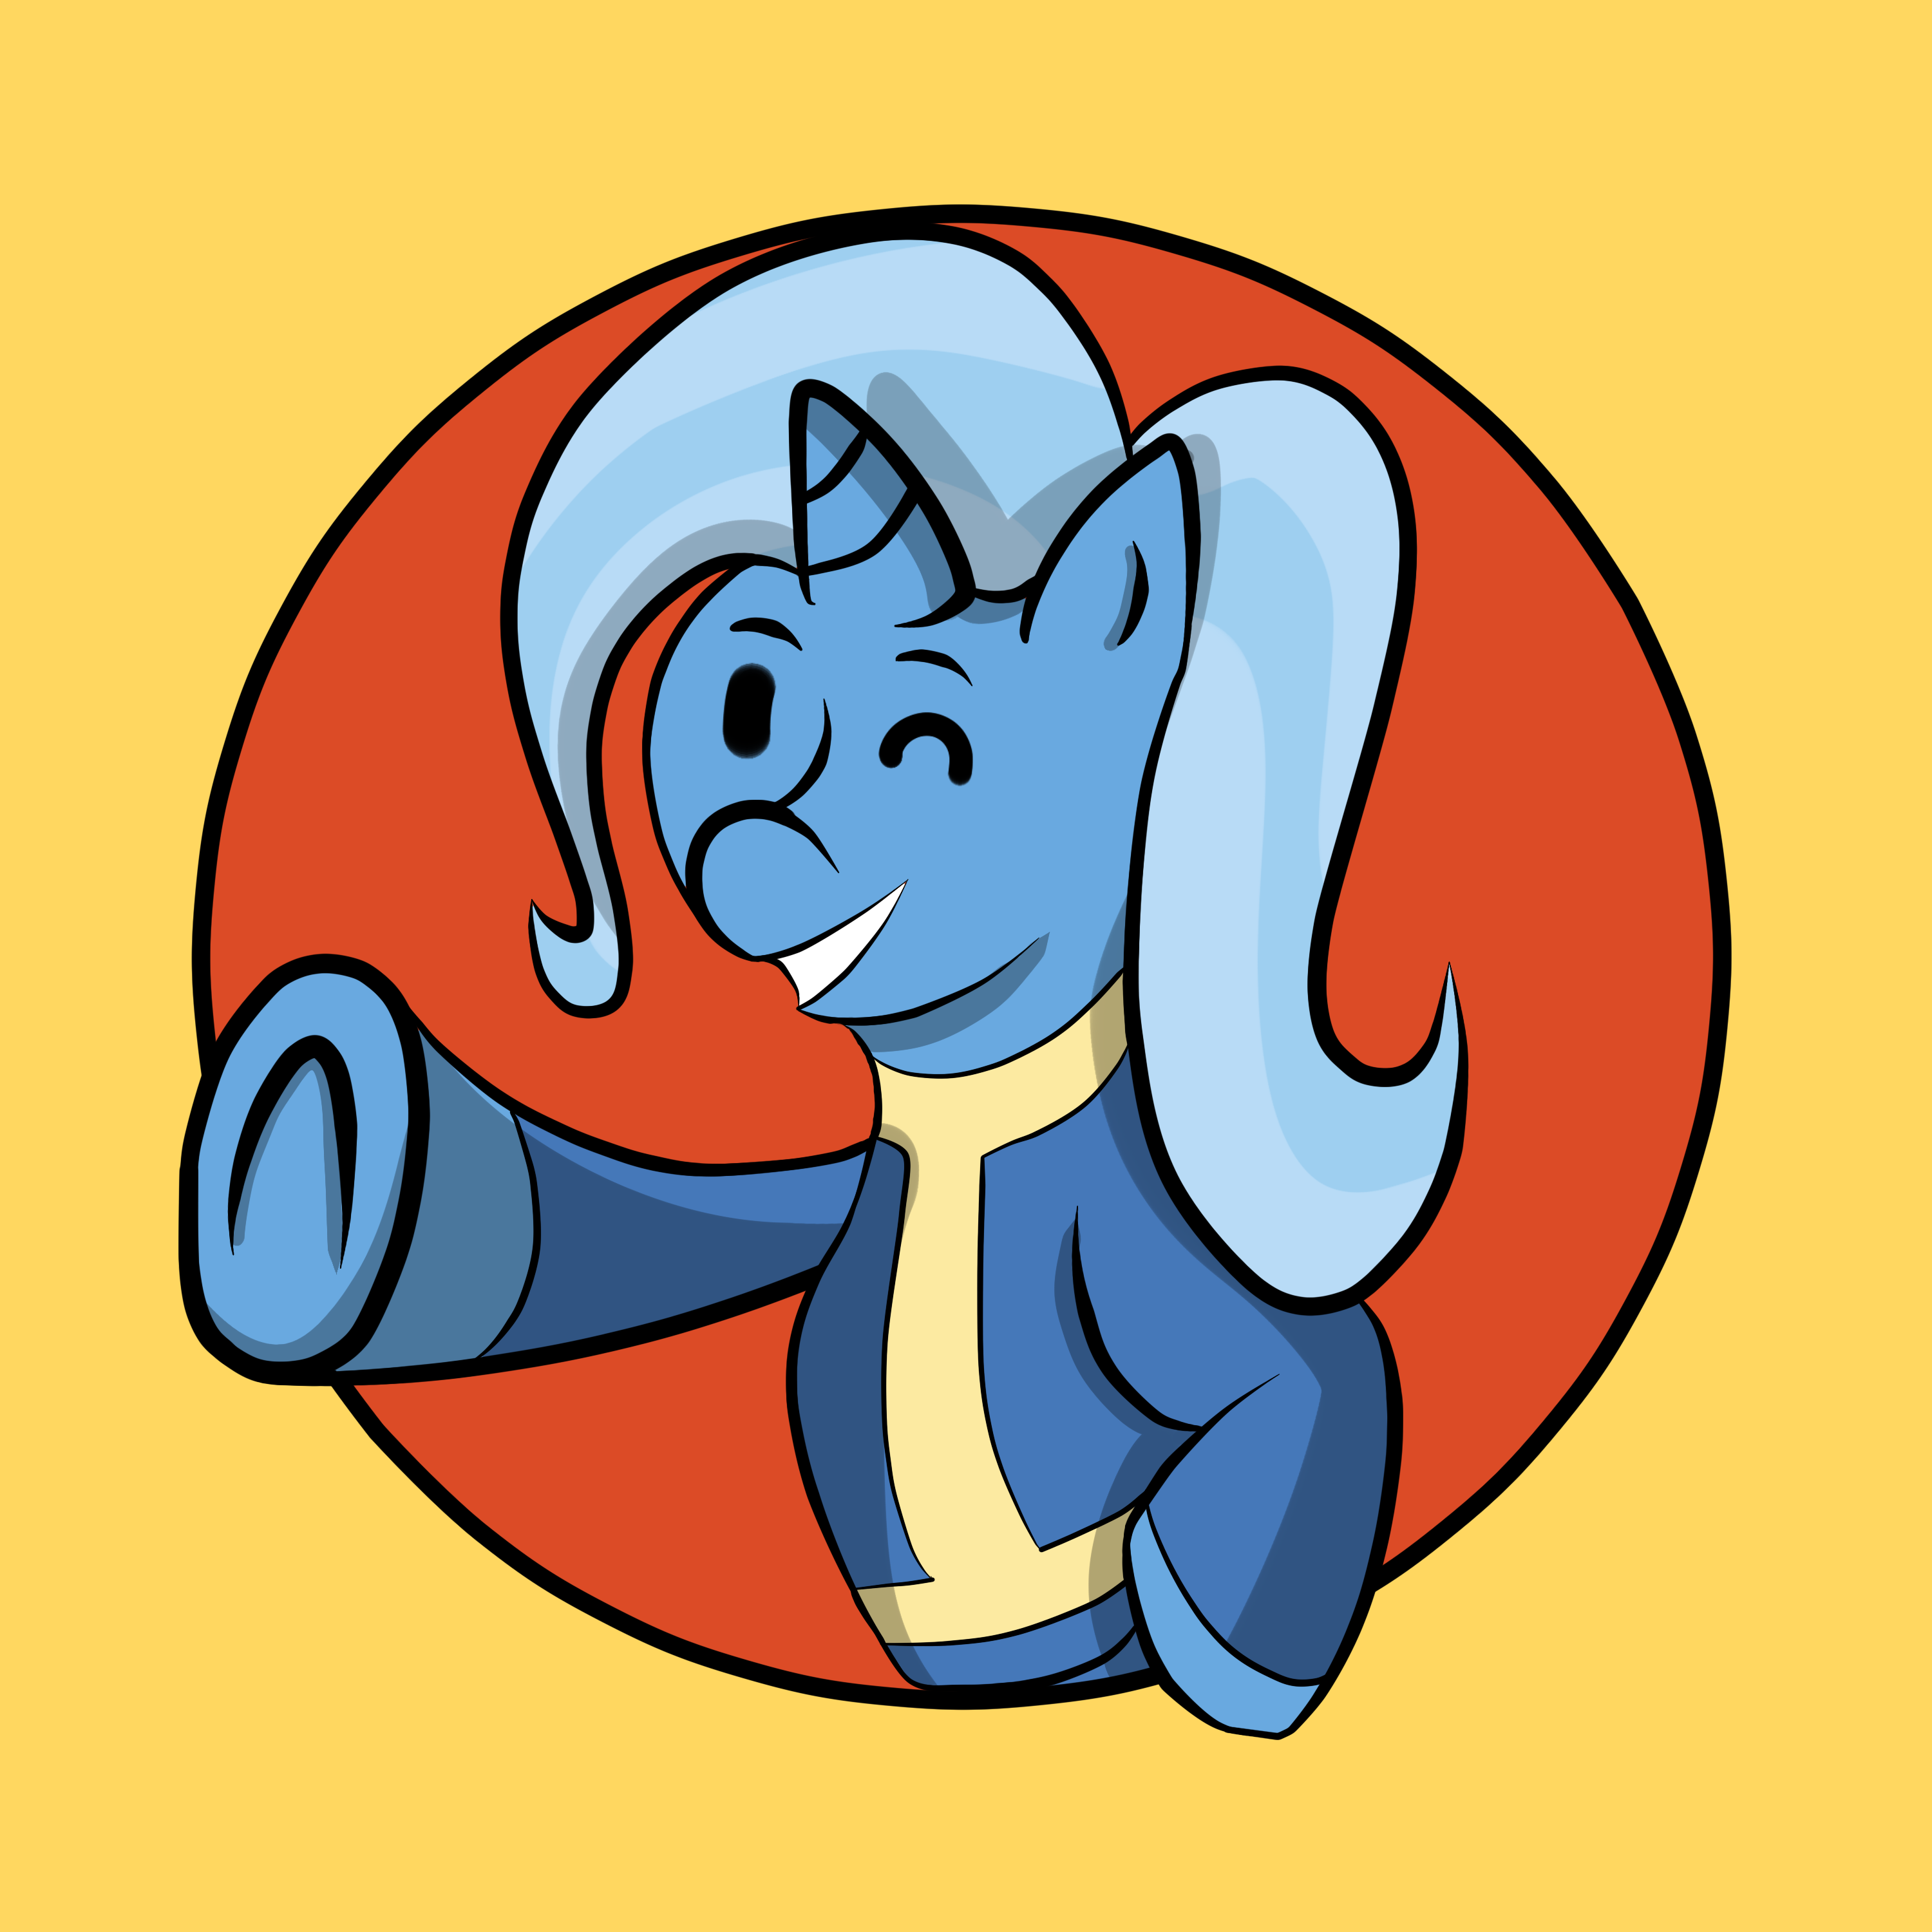 http://orig11.deviantart.net/10a5/f/2015/260/7/6/fallout_trixie_by_wilshirewolf-d99yqdt.png